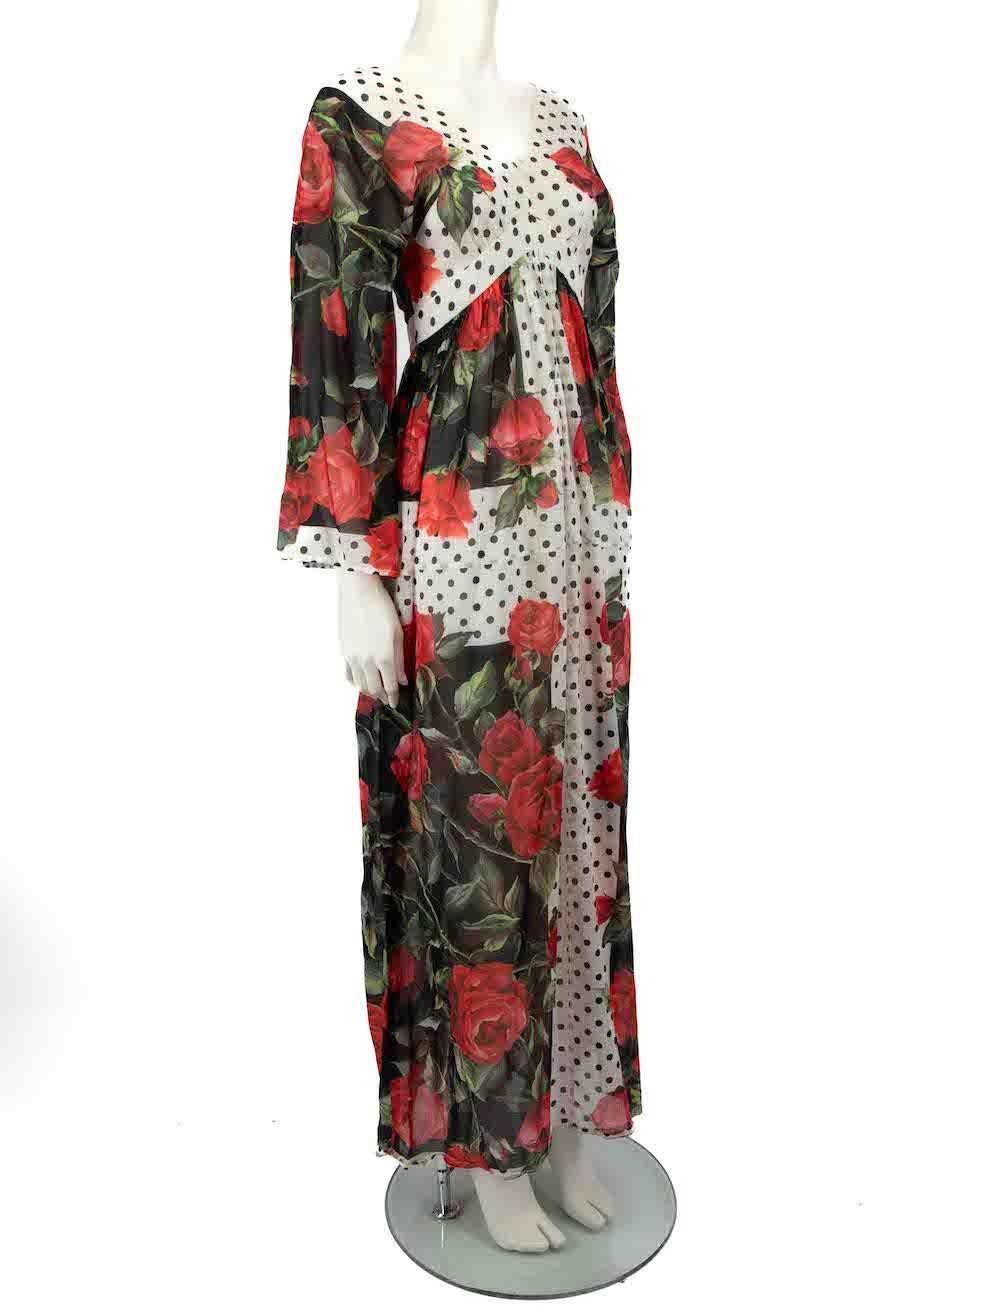 CONDITION is Very good. Minimal wear to dress is evident. Minimal wear to back centre zip and front neckline where minor discolouration can be found on this used Dolce & Gabbana designer resale item.
 
 
 
 Details
 
 
 Multicolour
 
 Cotton
 
 Maxi